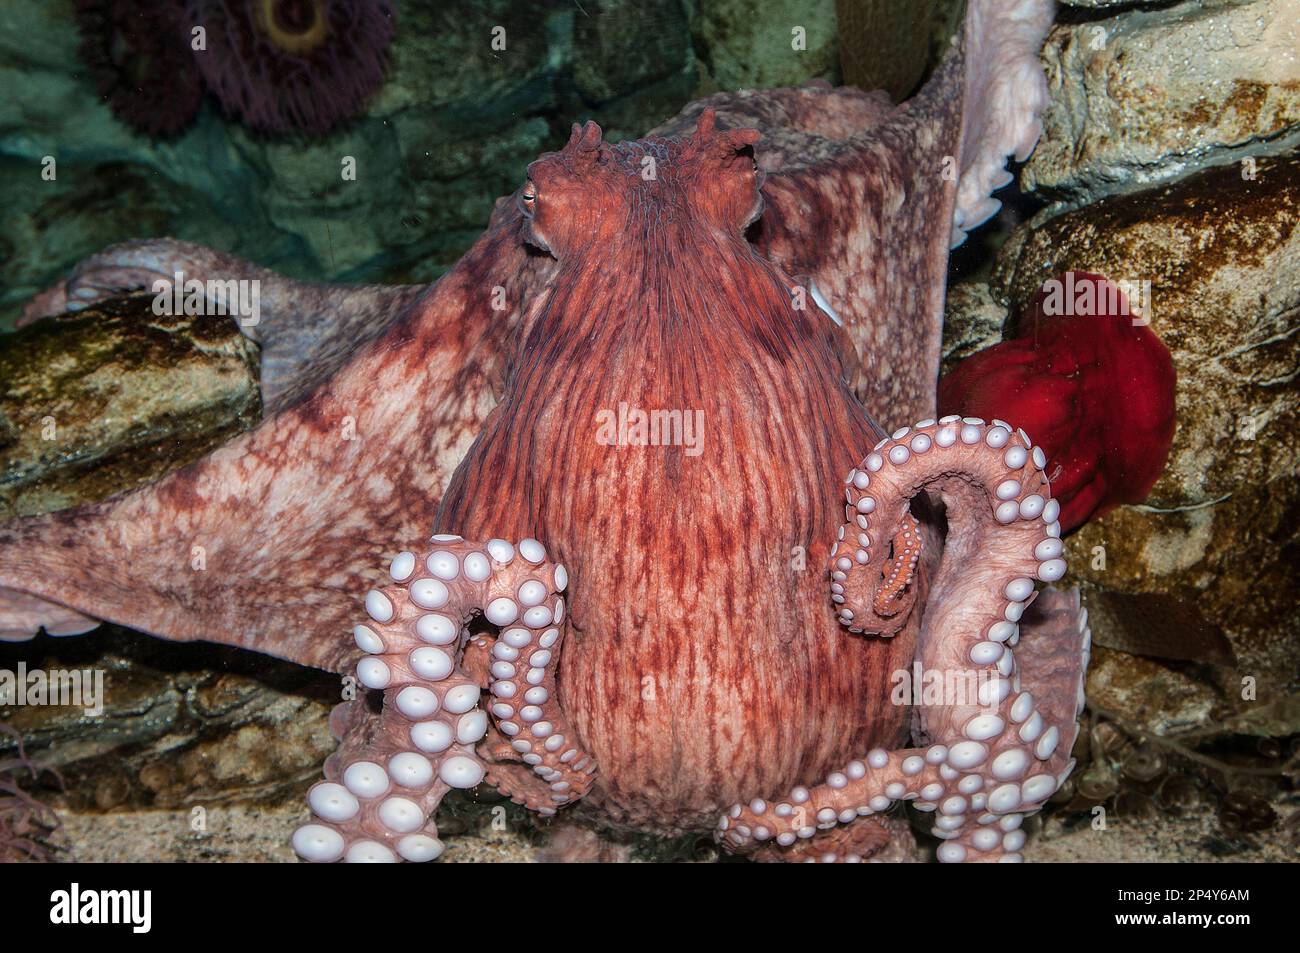 Giant pacific octopus full body view Stock Photo